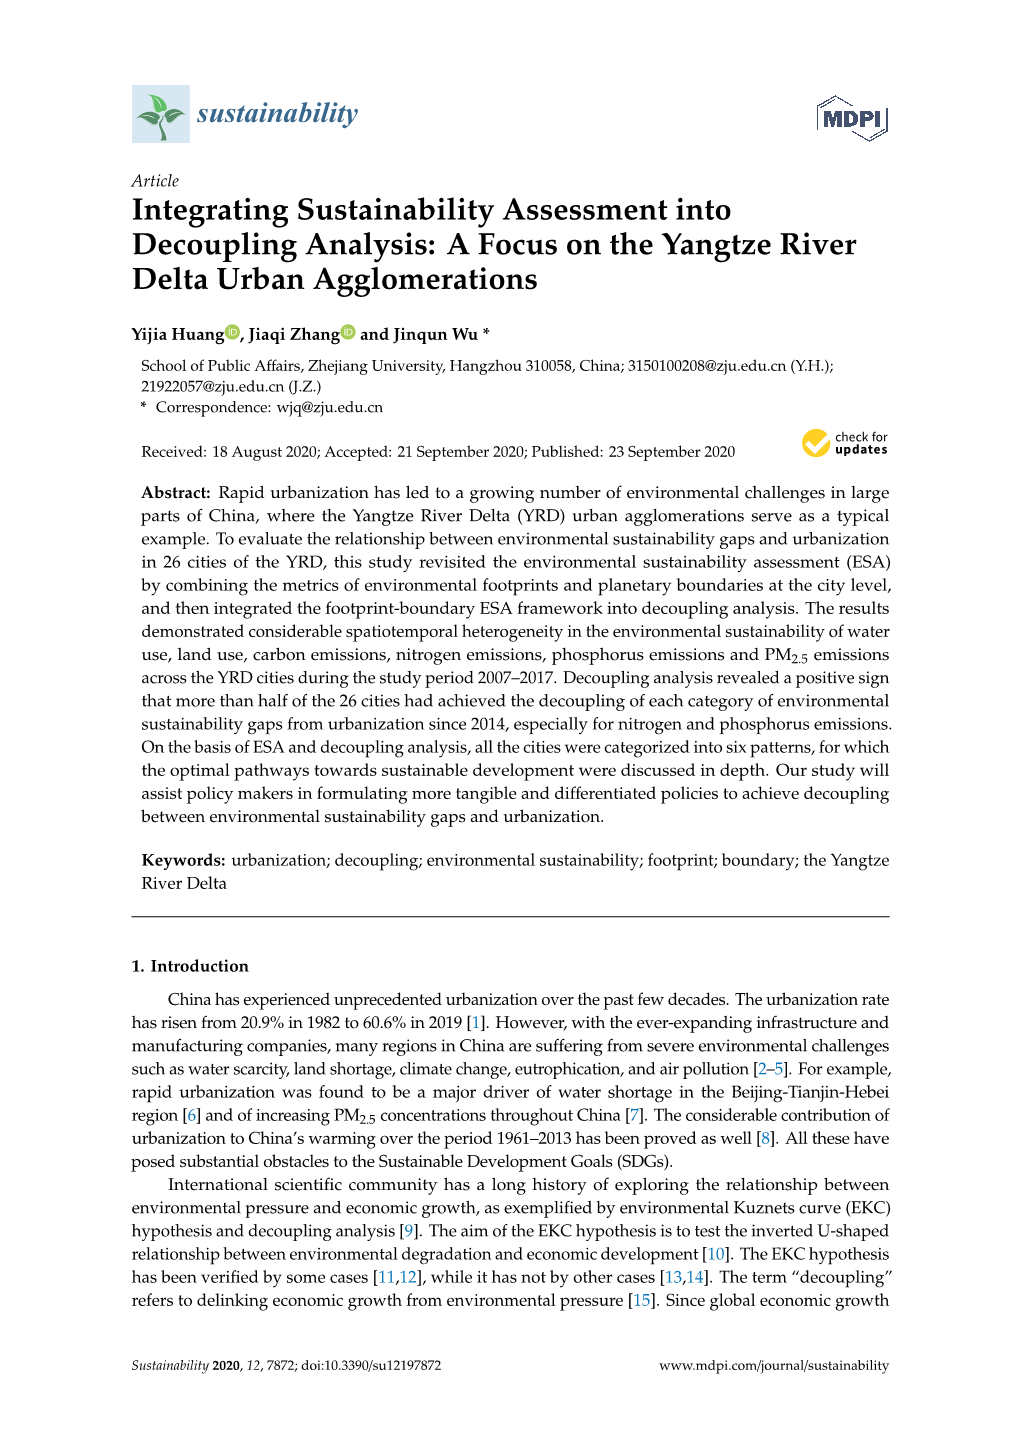 Integrating Sustainability Assessment Into Decoupling Analysis: a Focus on the Yangtze River Delta Urban Agglomerations